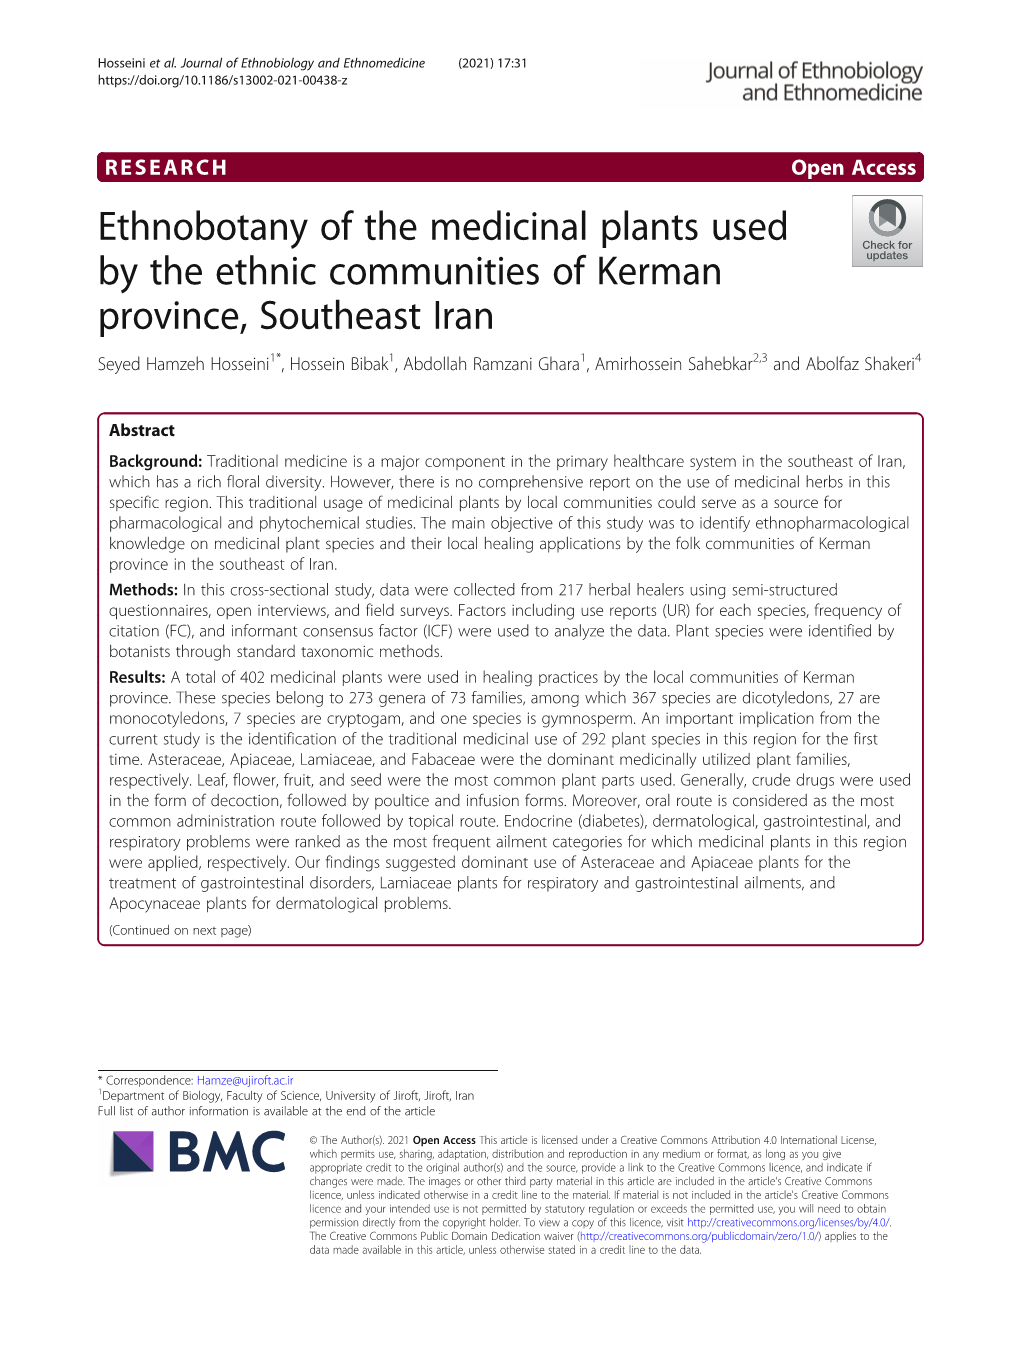 Ethnobotany of the Medicinal Plants Used by the Ethnic Communities Of